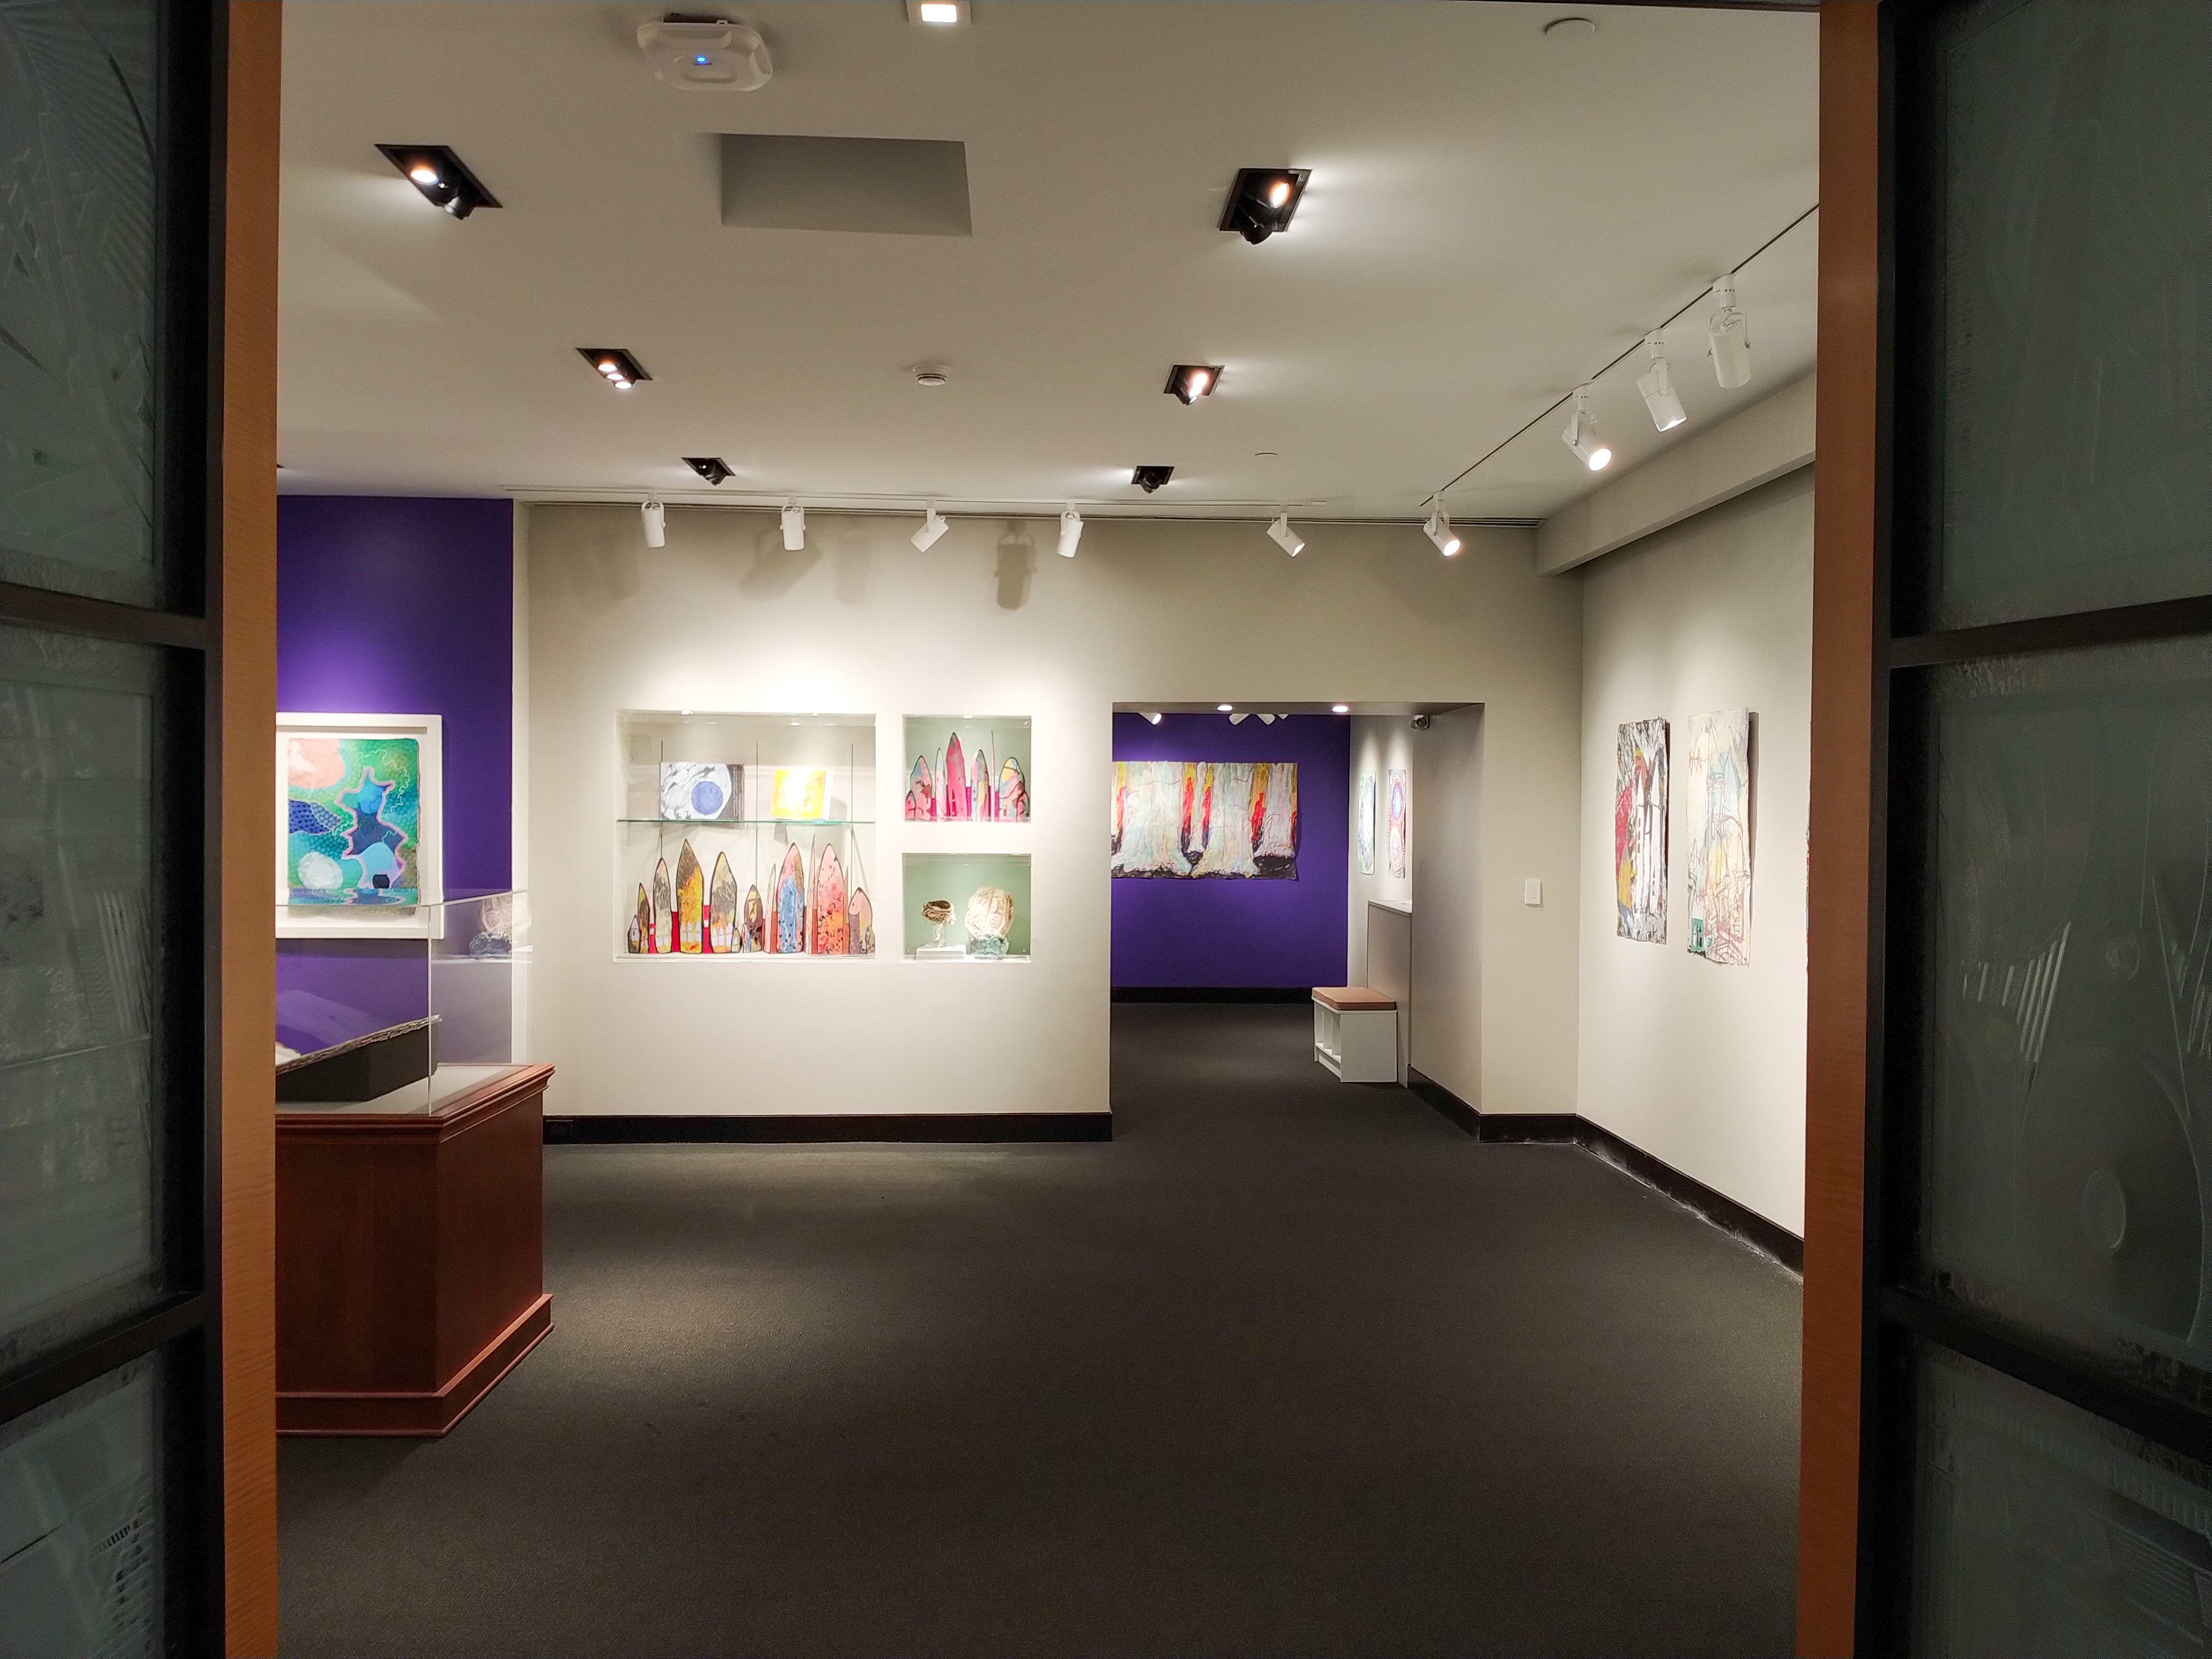 Shot of the view from the gallery entrance. Looking across the space to see accordion books in cases inset into the wall and to the right of the cases an entrance to a smaller gallery with a pulp painting of the trunks of trees installed on a purple gallery wall.